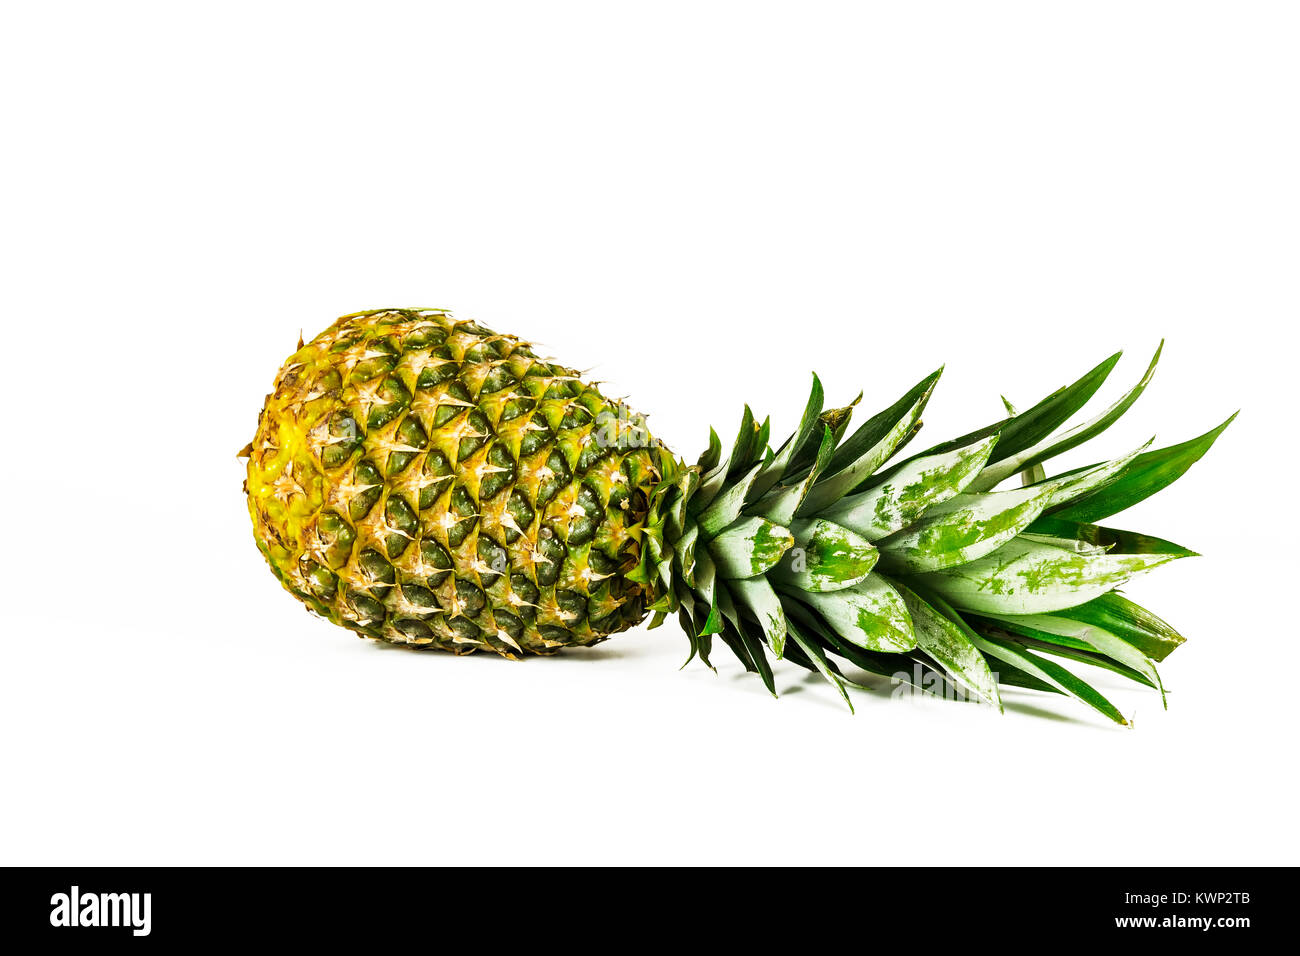 A large ripe pineapple lies on a white background Stock Photo